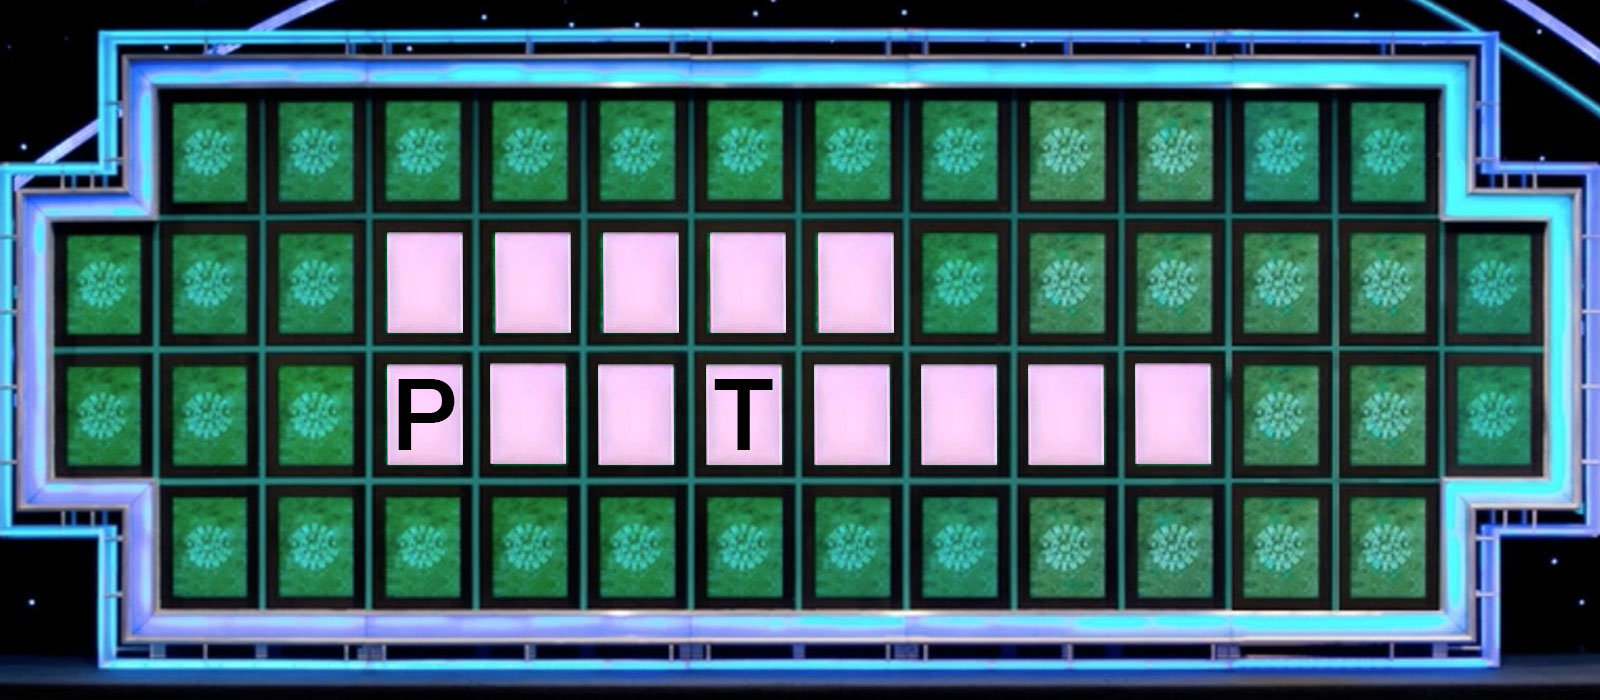 Can You Solve These Wheel of Fortune Puzzles? 1015